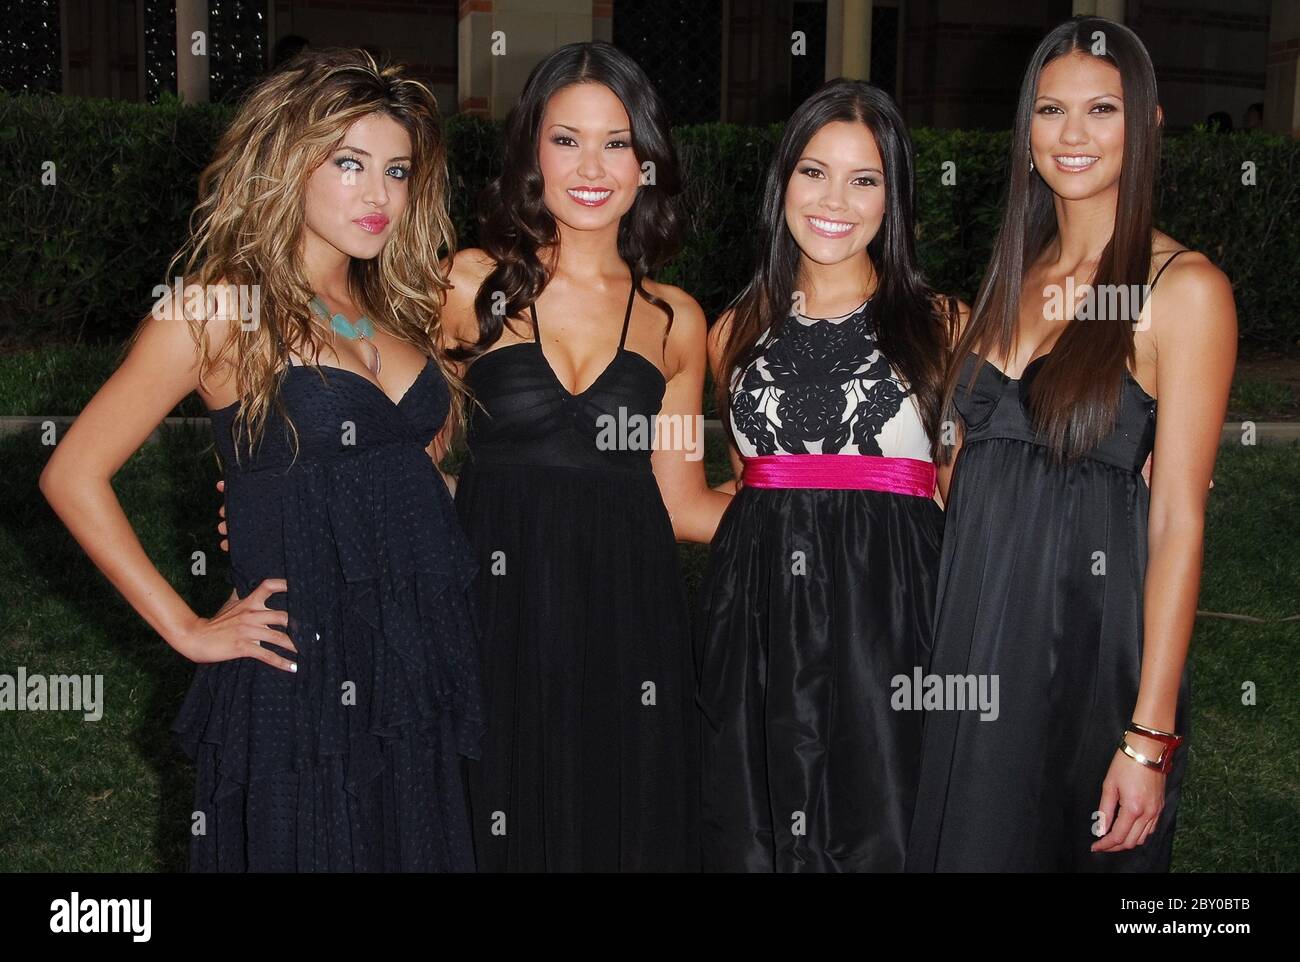 Leyla Milani and Friends at the 2007 AZN Asian Excellence Awards held at the Royce Hall UCLA Campus in Los Angeles, CA. The event took place on Wednesday, May 16, 2007. Photo by: SBM / PictureLux - File Reference # 34006-5180SBMPLX Stock Photo